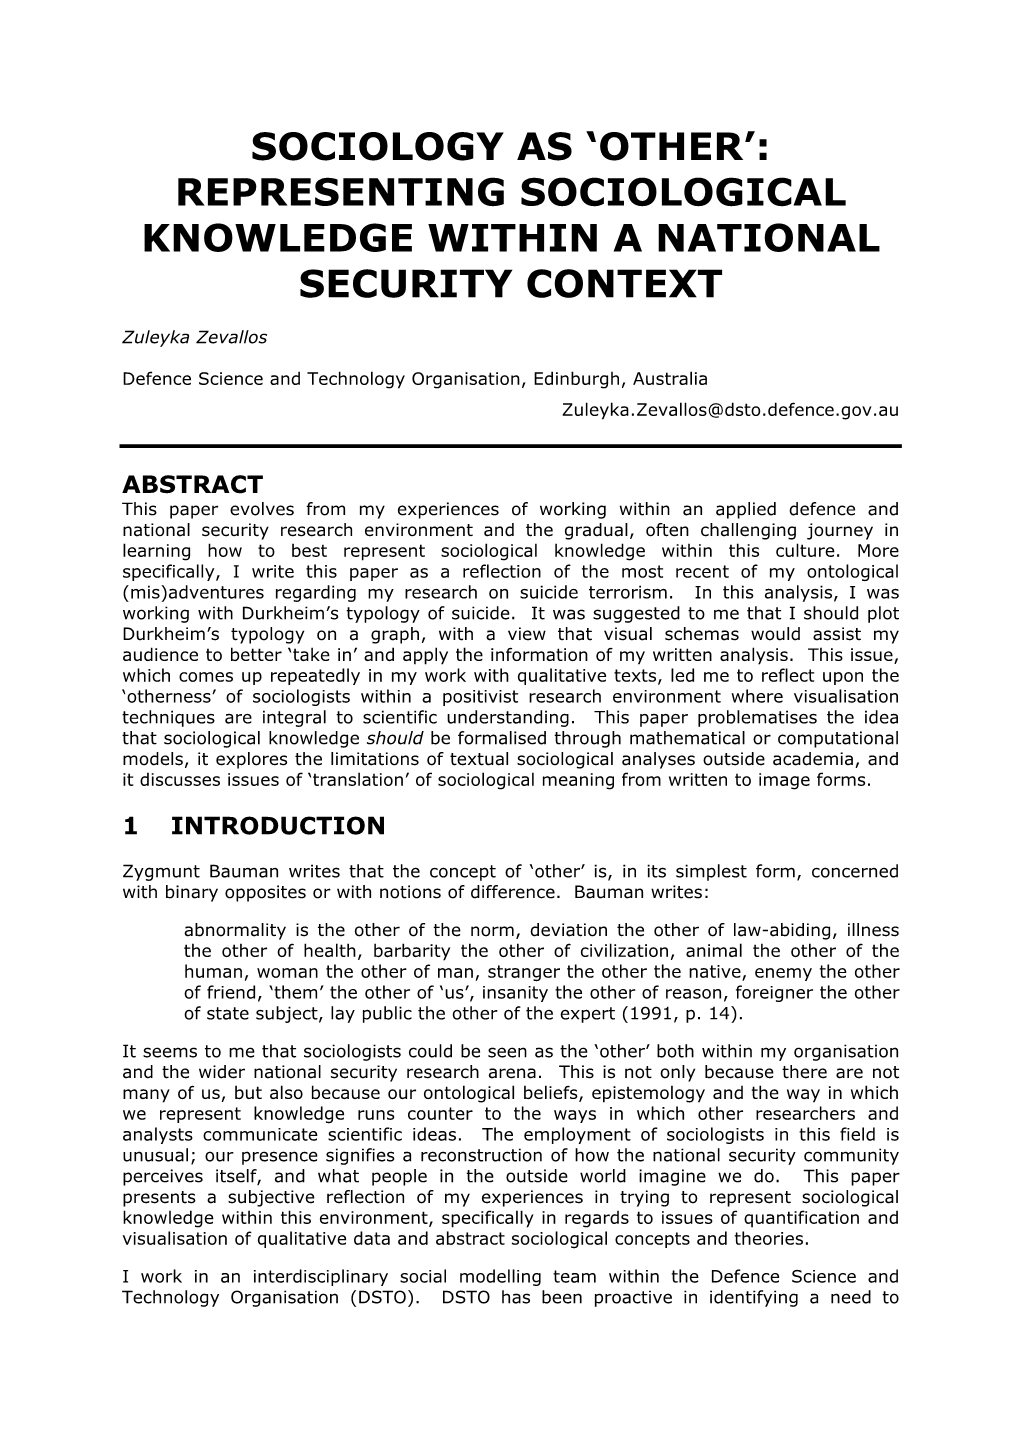 'Other': Representing Sociological Knowledge Within a National Security Context